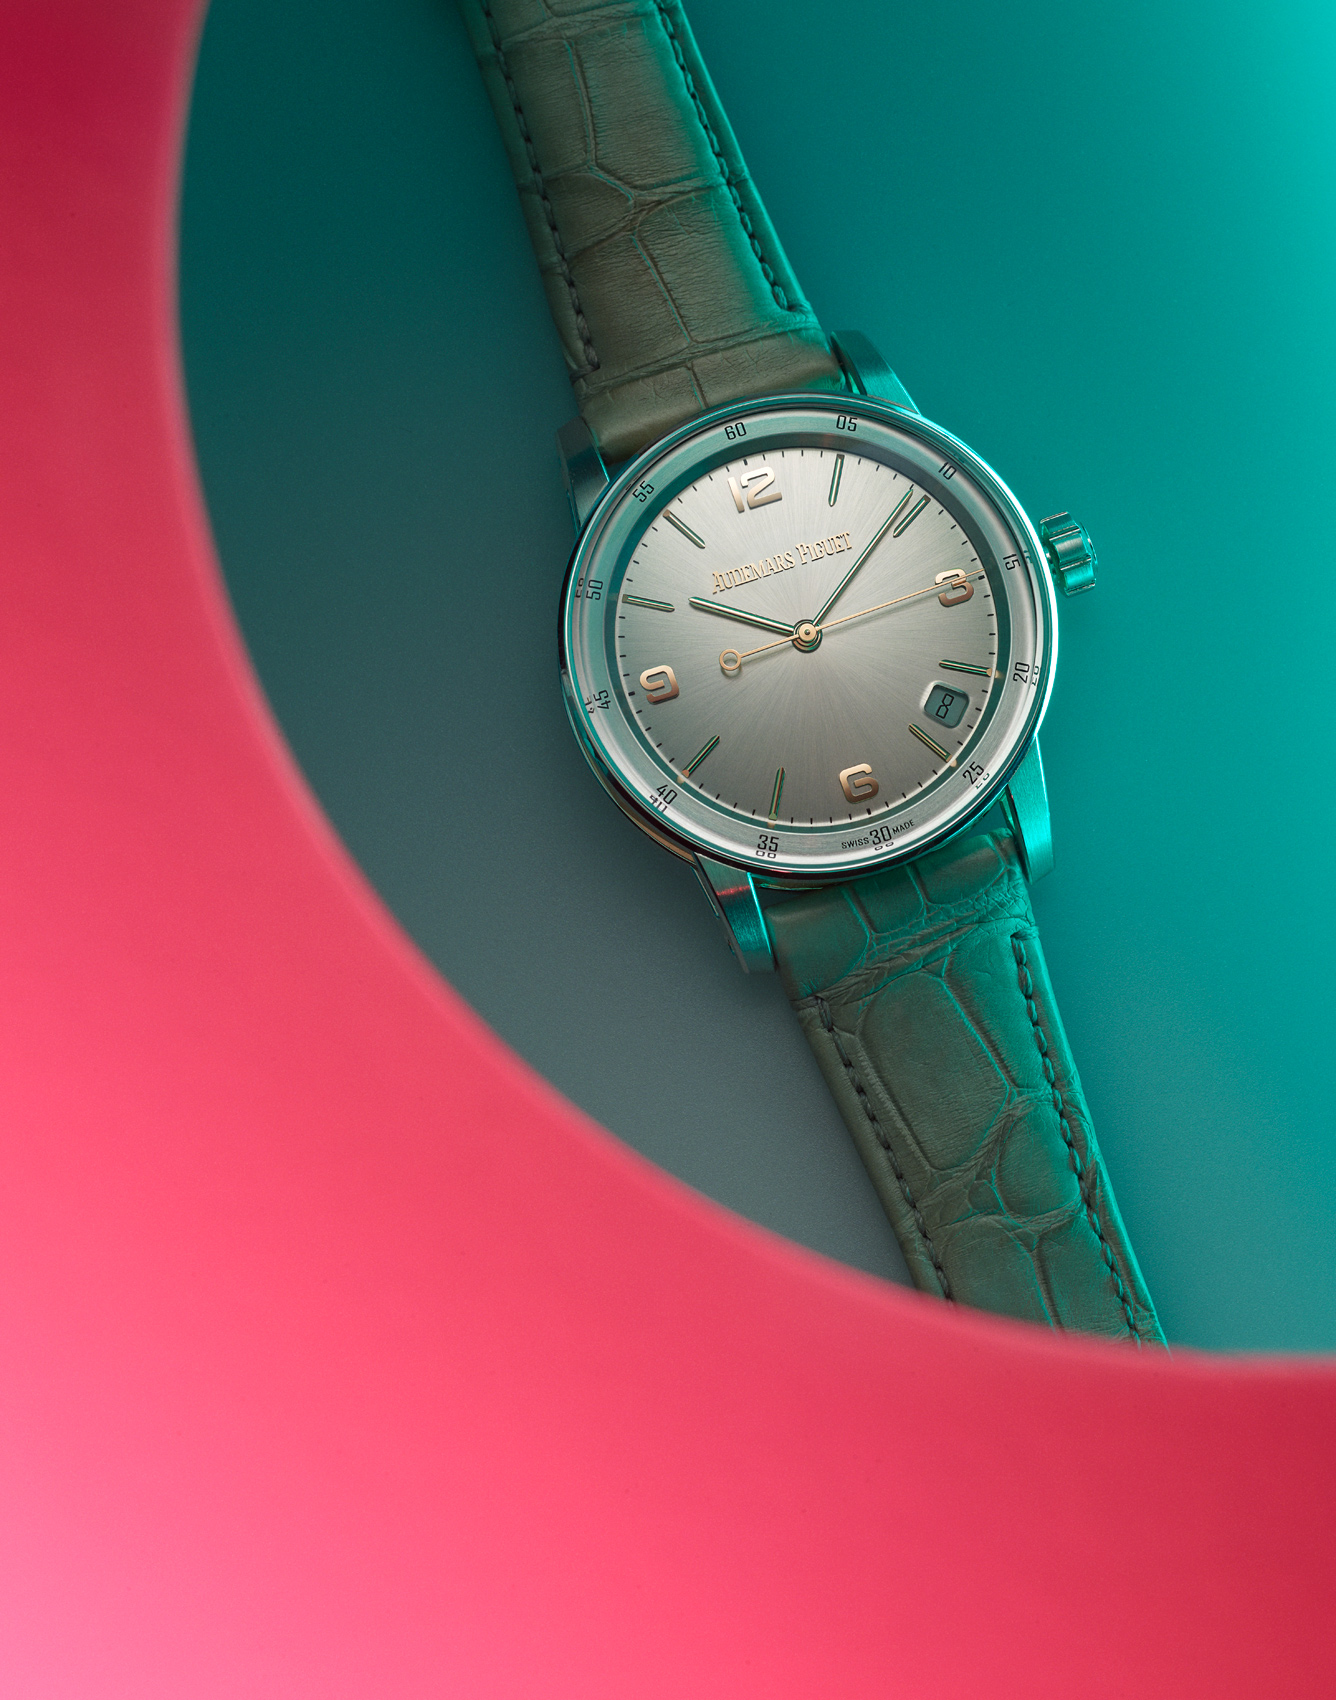 Luxury watch photography by Alexander Kent London based still life and product photographer.